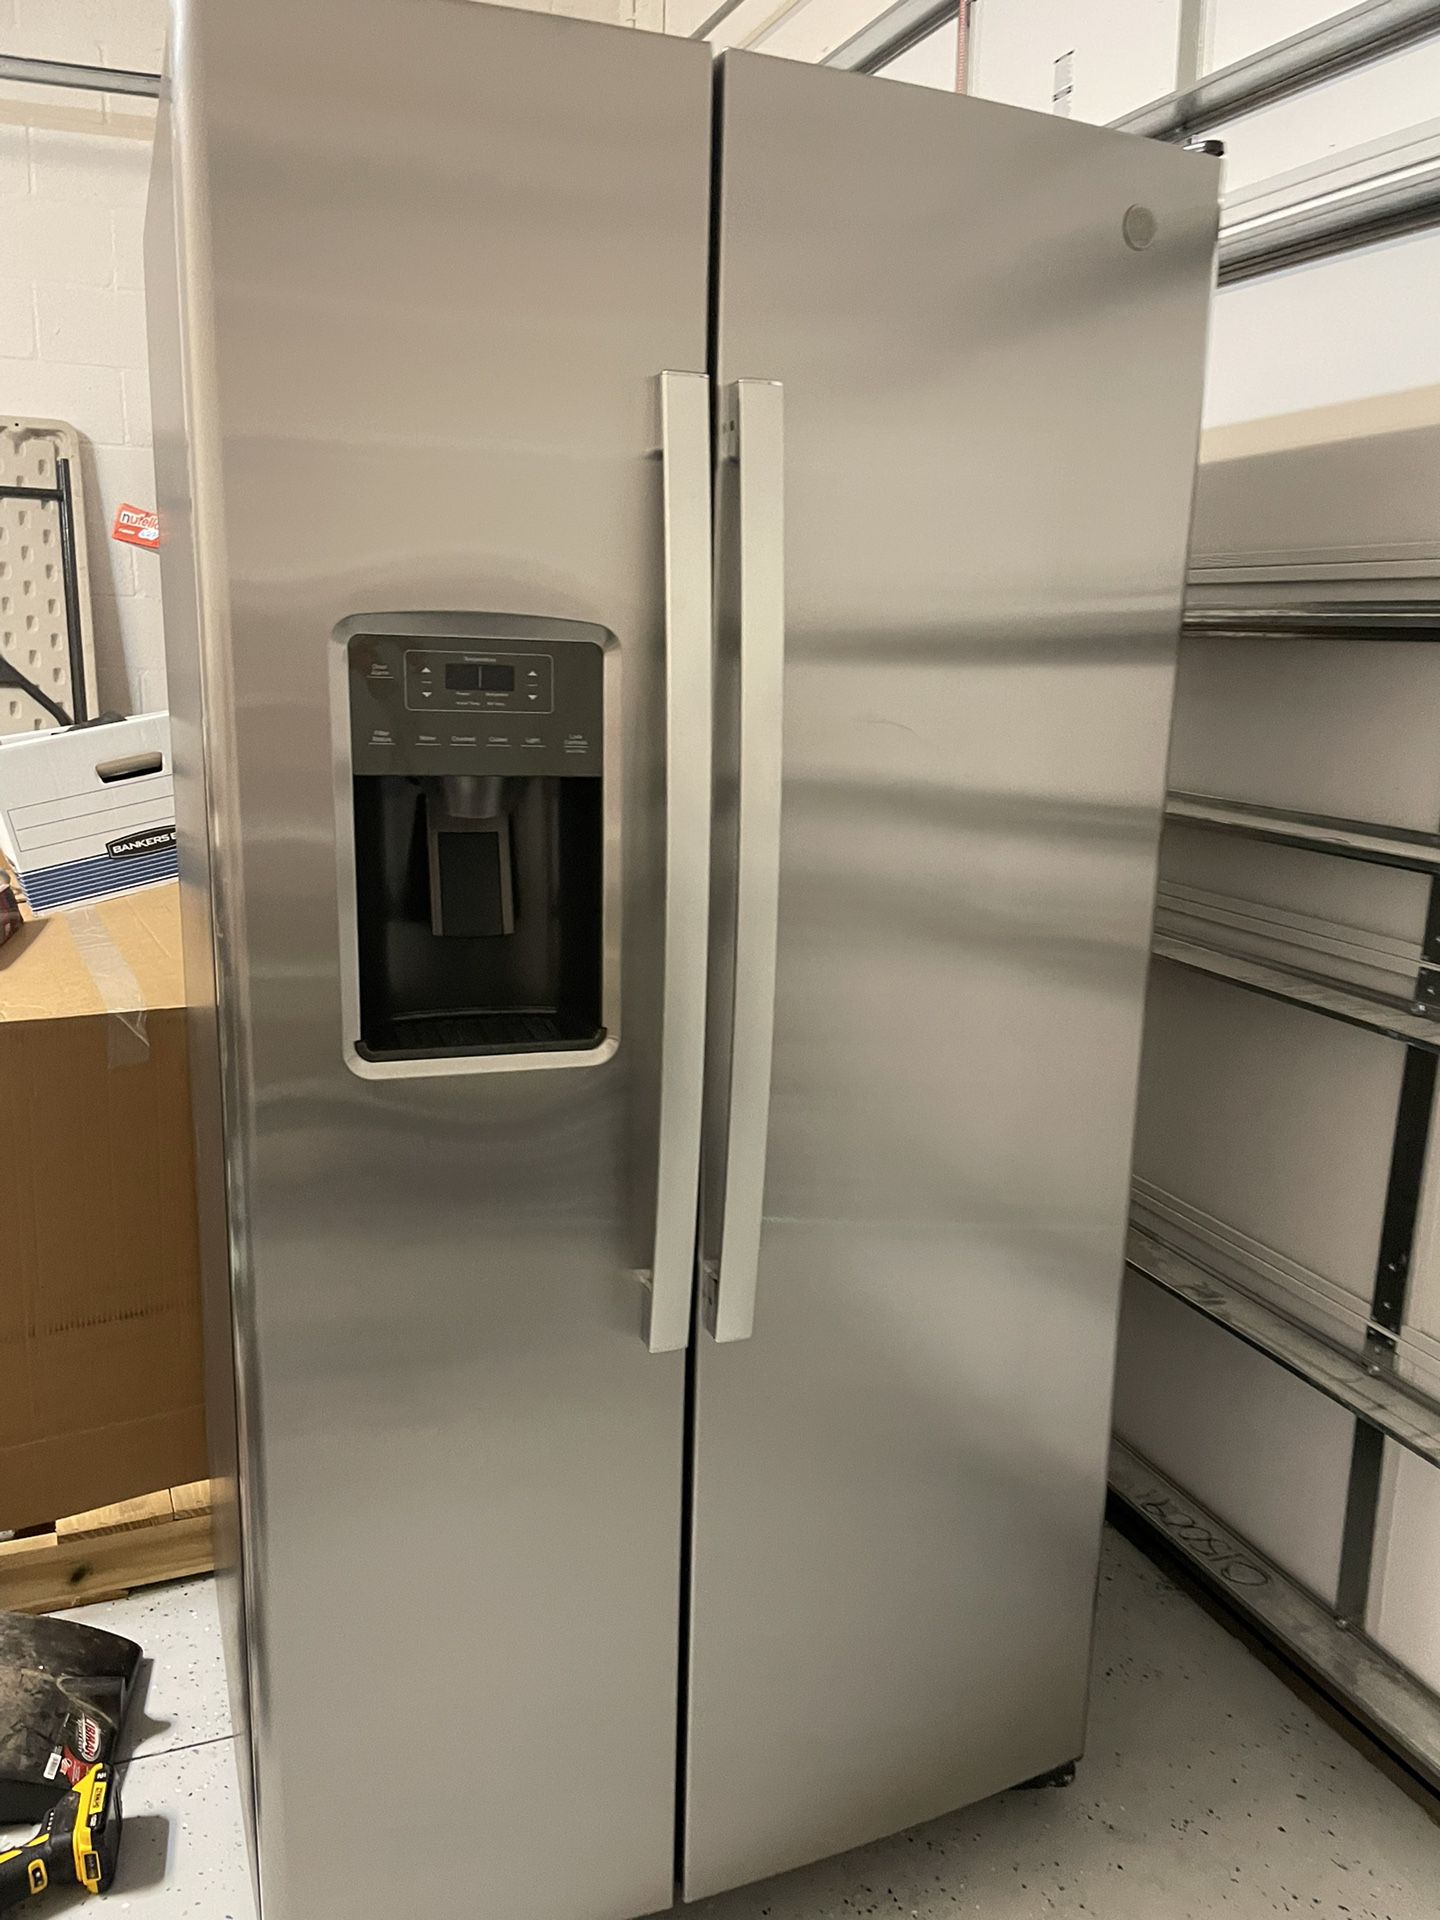 NEW GE Side-By-Side Refrigerator